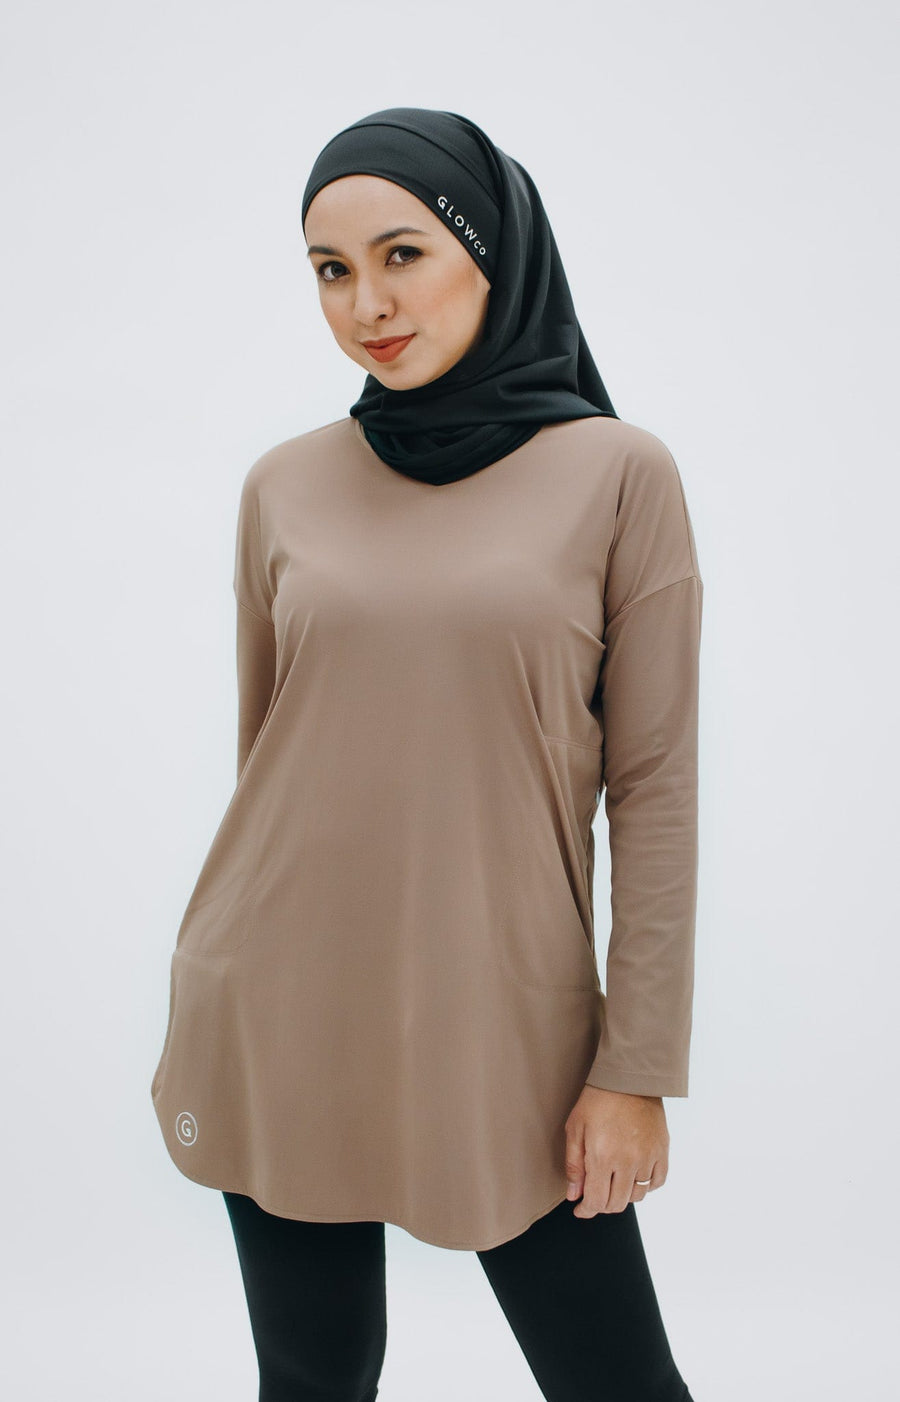 Tops GLOWco Exclusive Seriously Smooth Top in Mocha